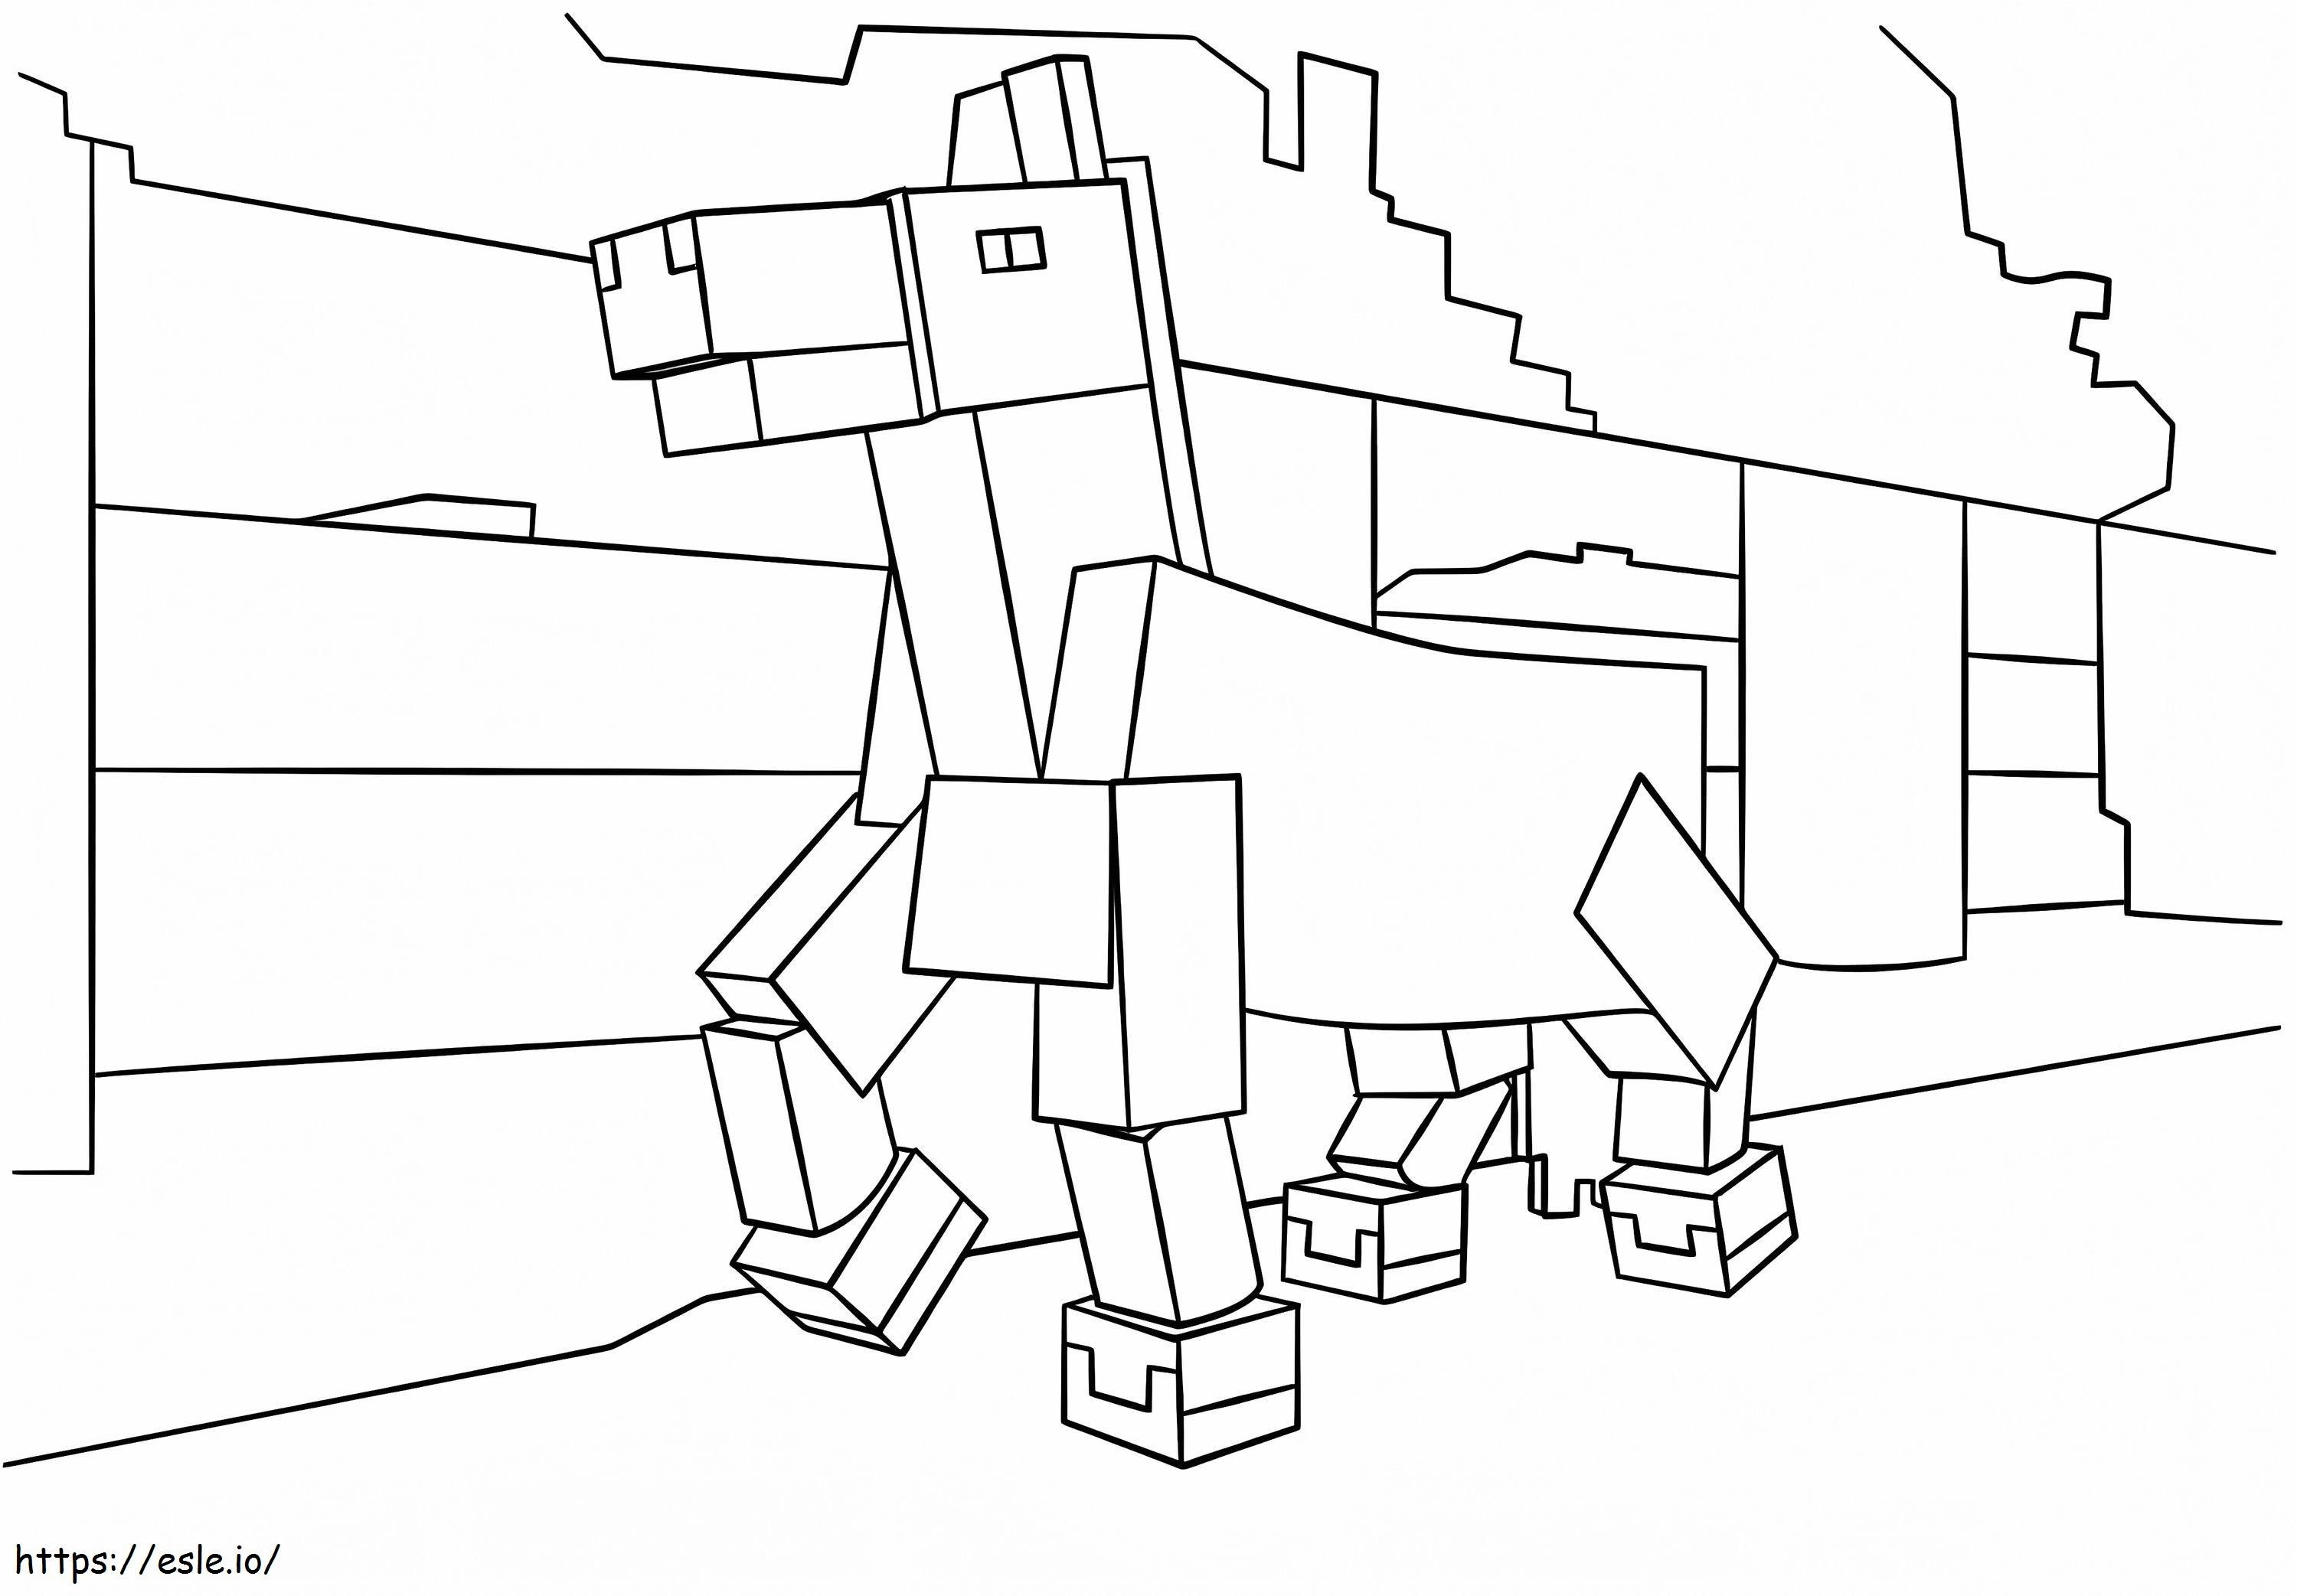 Minecraft Cheval coloring page